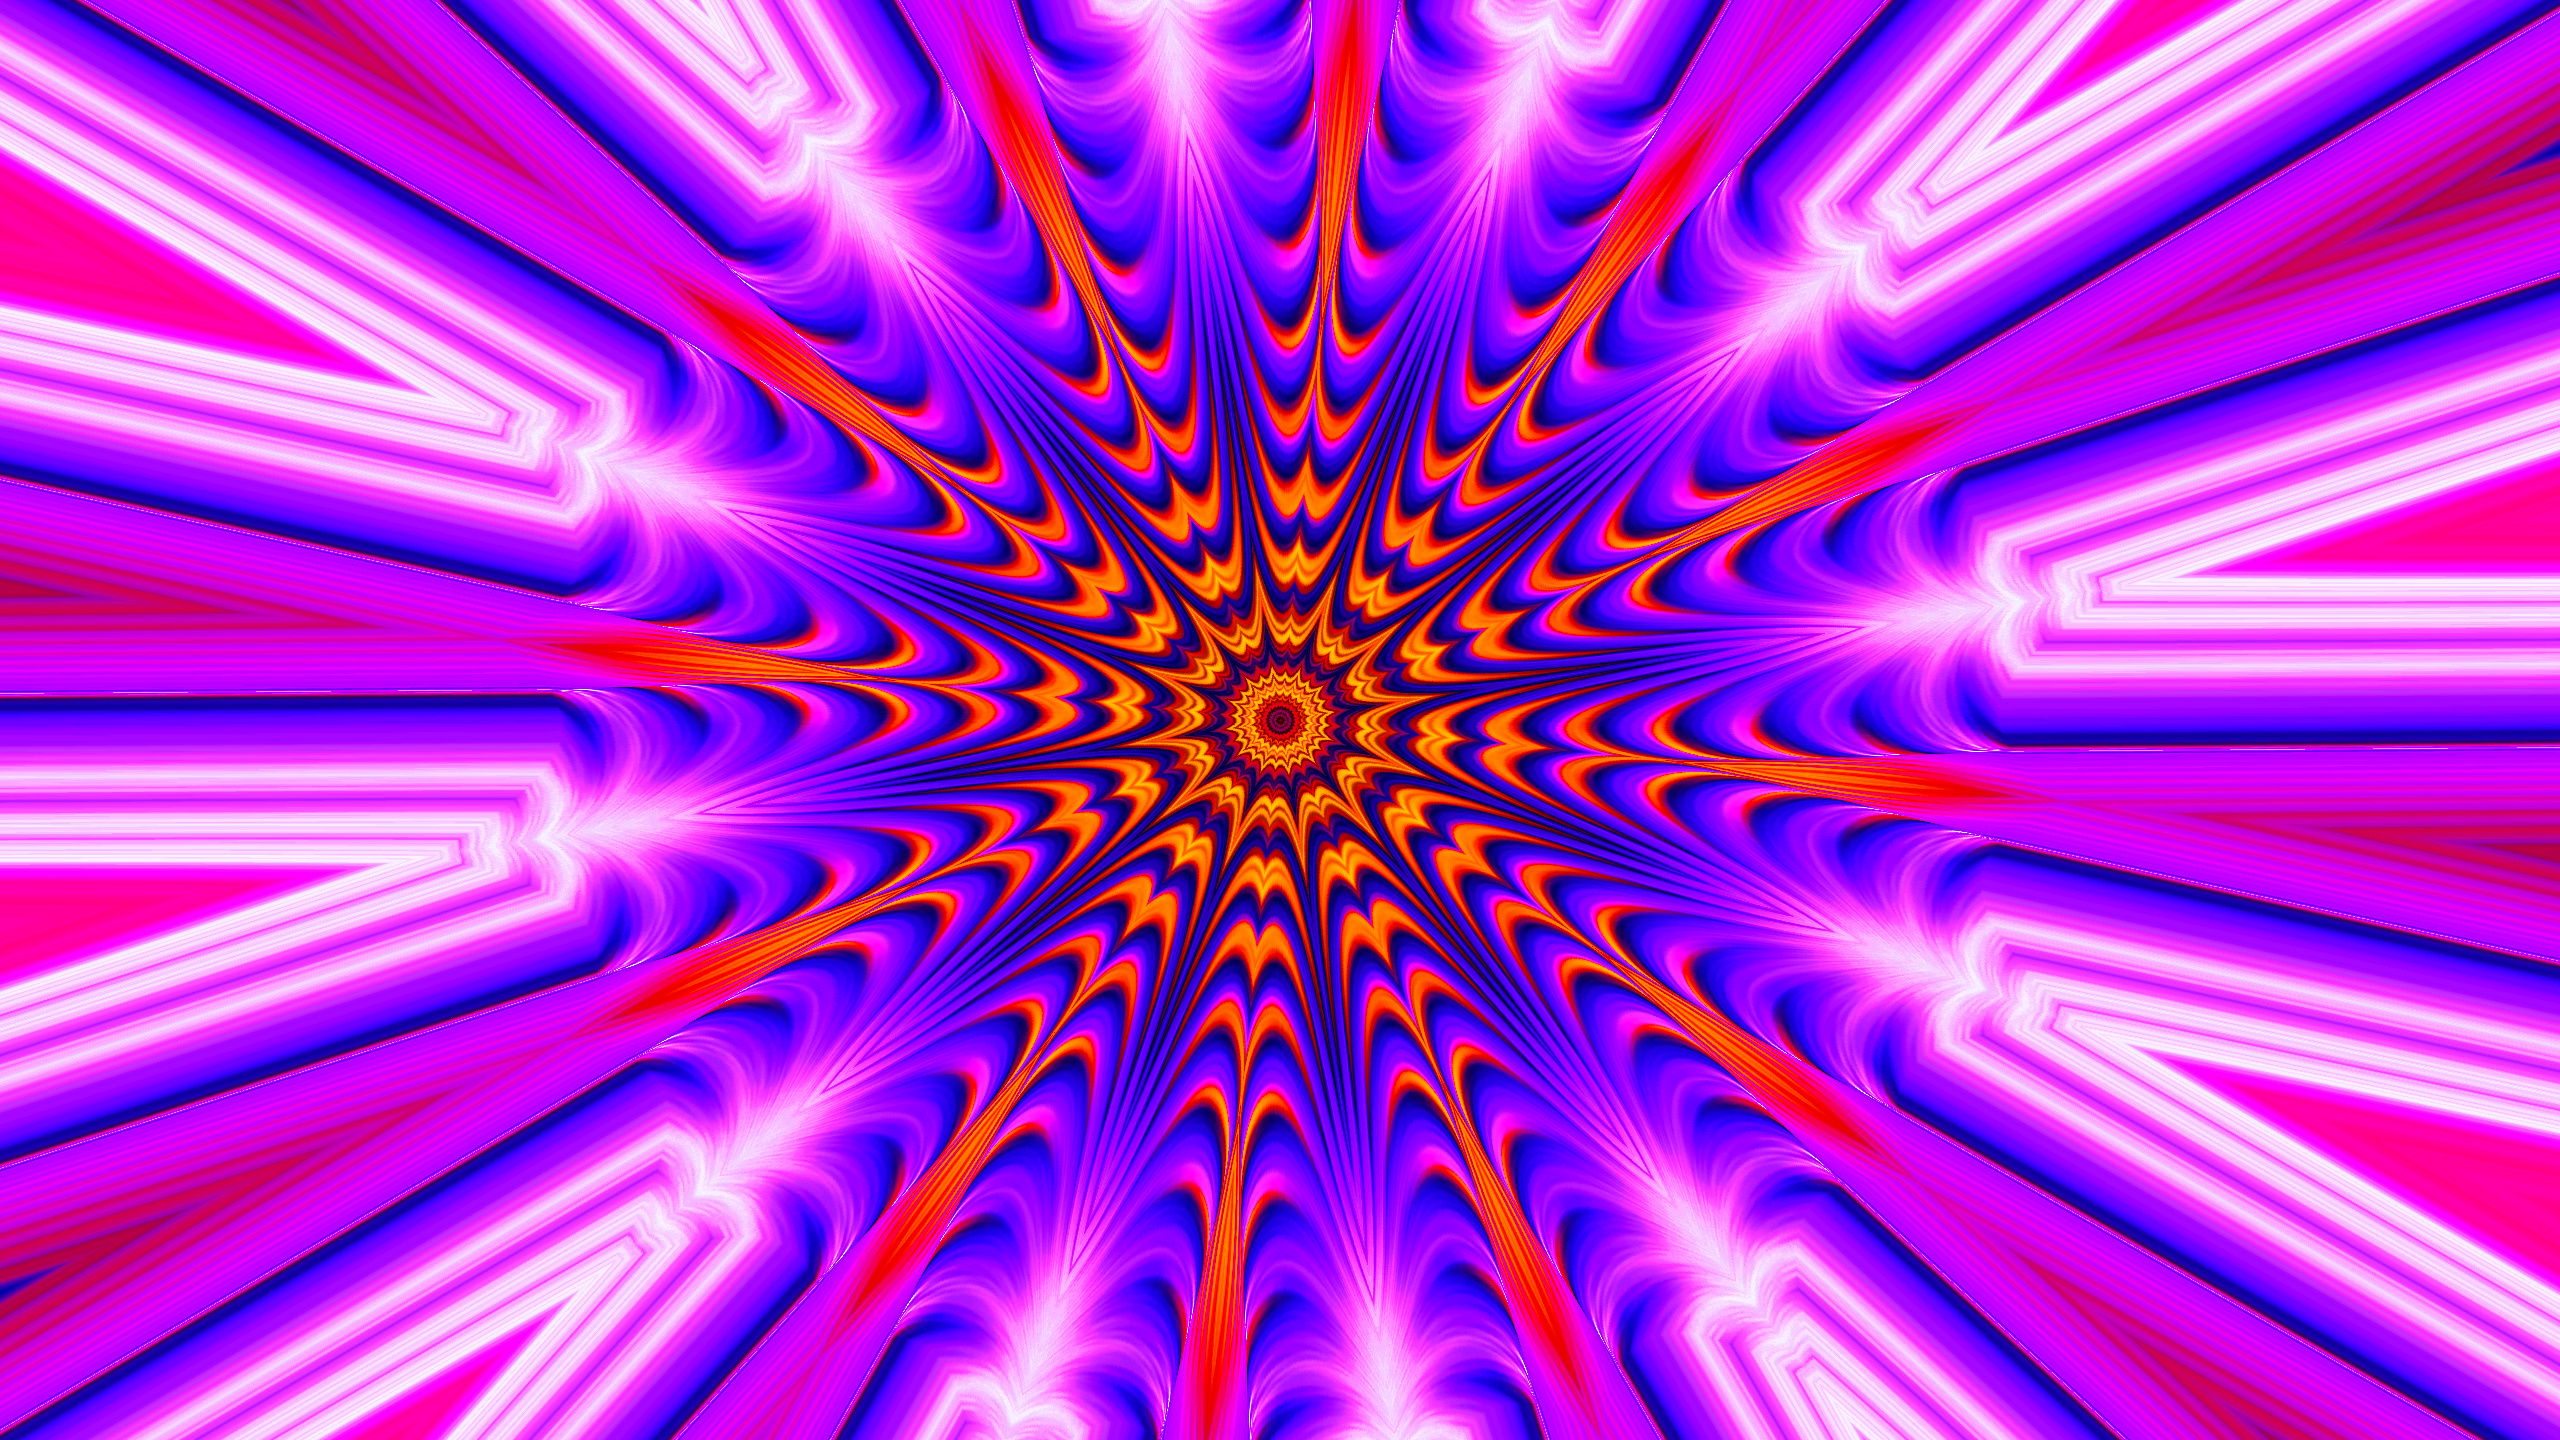 Optical Illusion (Other), Abstract illusions, Visual puzzles, Illusion art, 2560x1440 HD Desktop